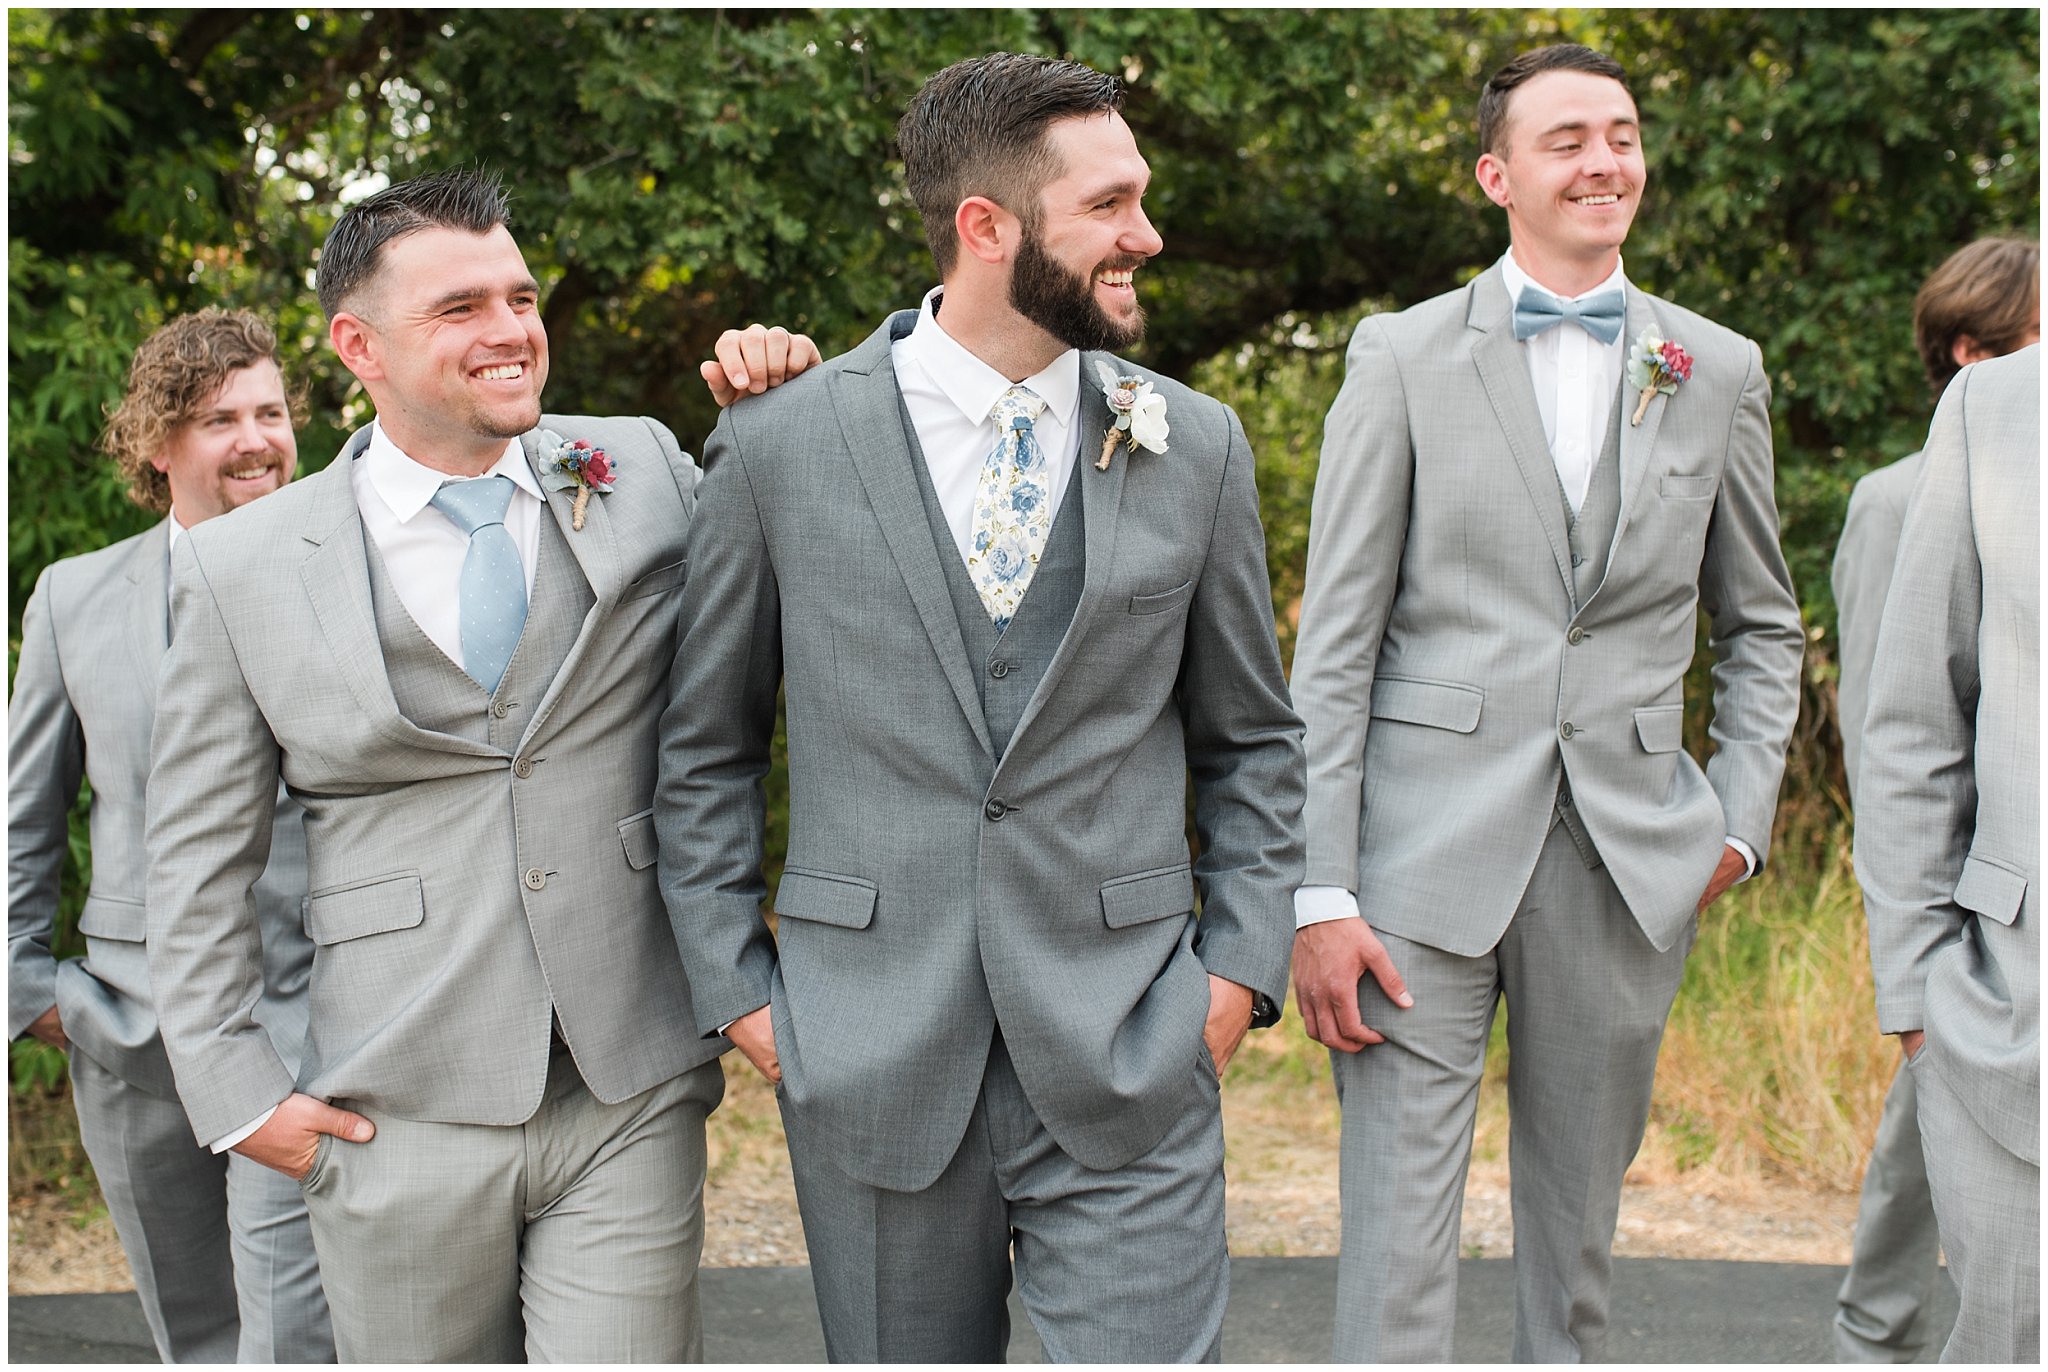 Groom and groomsmen wearing gray suits and blue floral ties | Dusty Blue and Rose Summer Wedding at Oak Hills Utah | Jessie and Dallin Photography